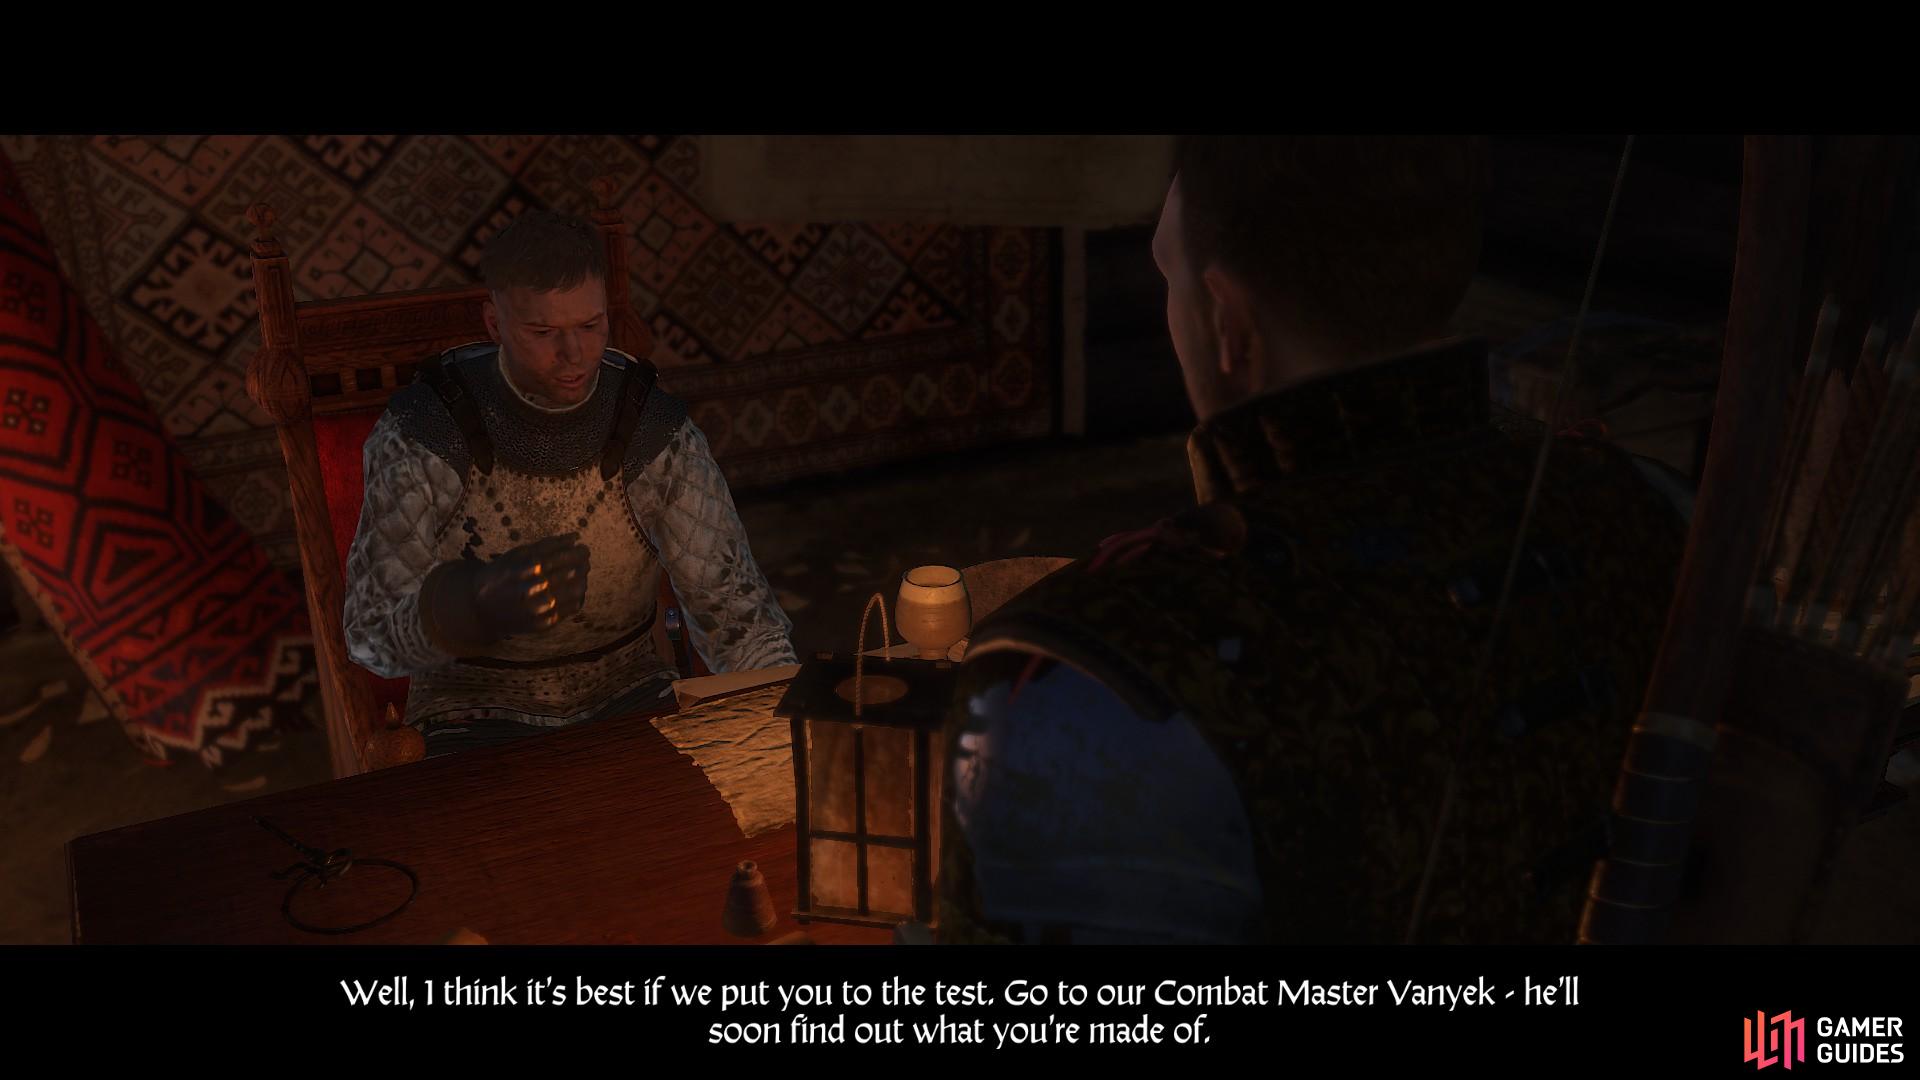 Erik will instruct you to see Combat Master Vanyek who is in the south east of the camp. You may note that you have seen him before.